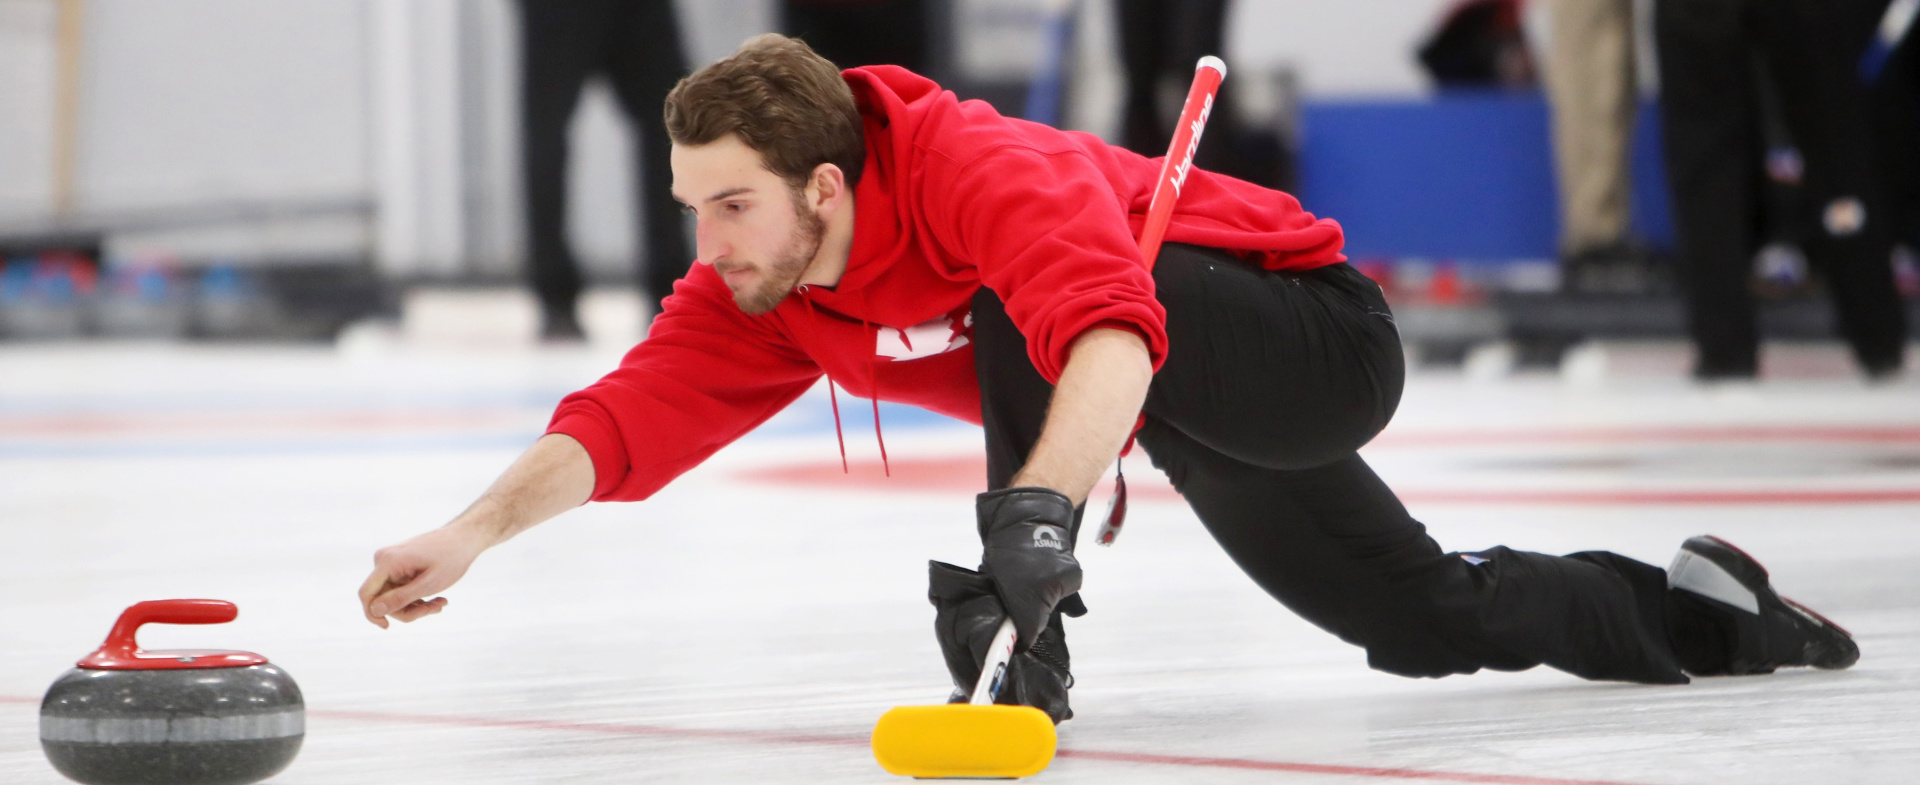 Hawks Place 2nd at AUS Curling Championship